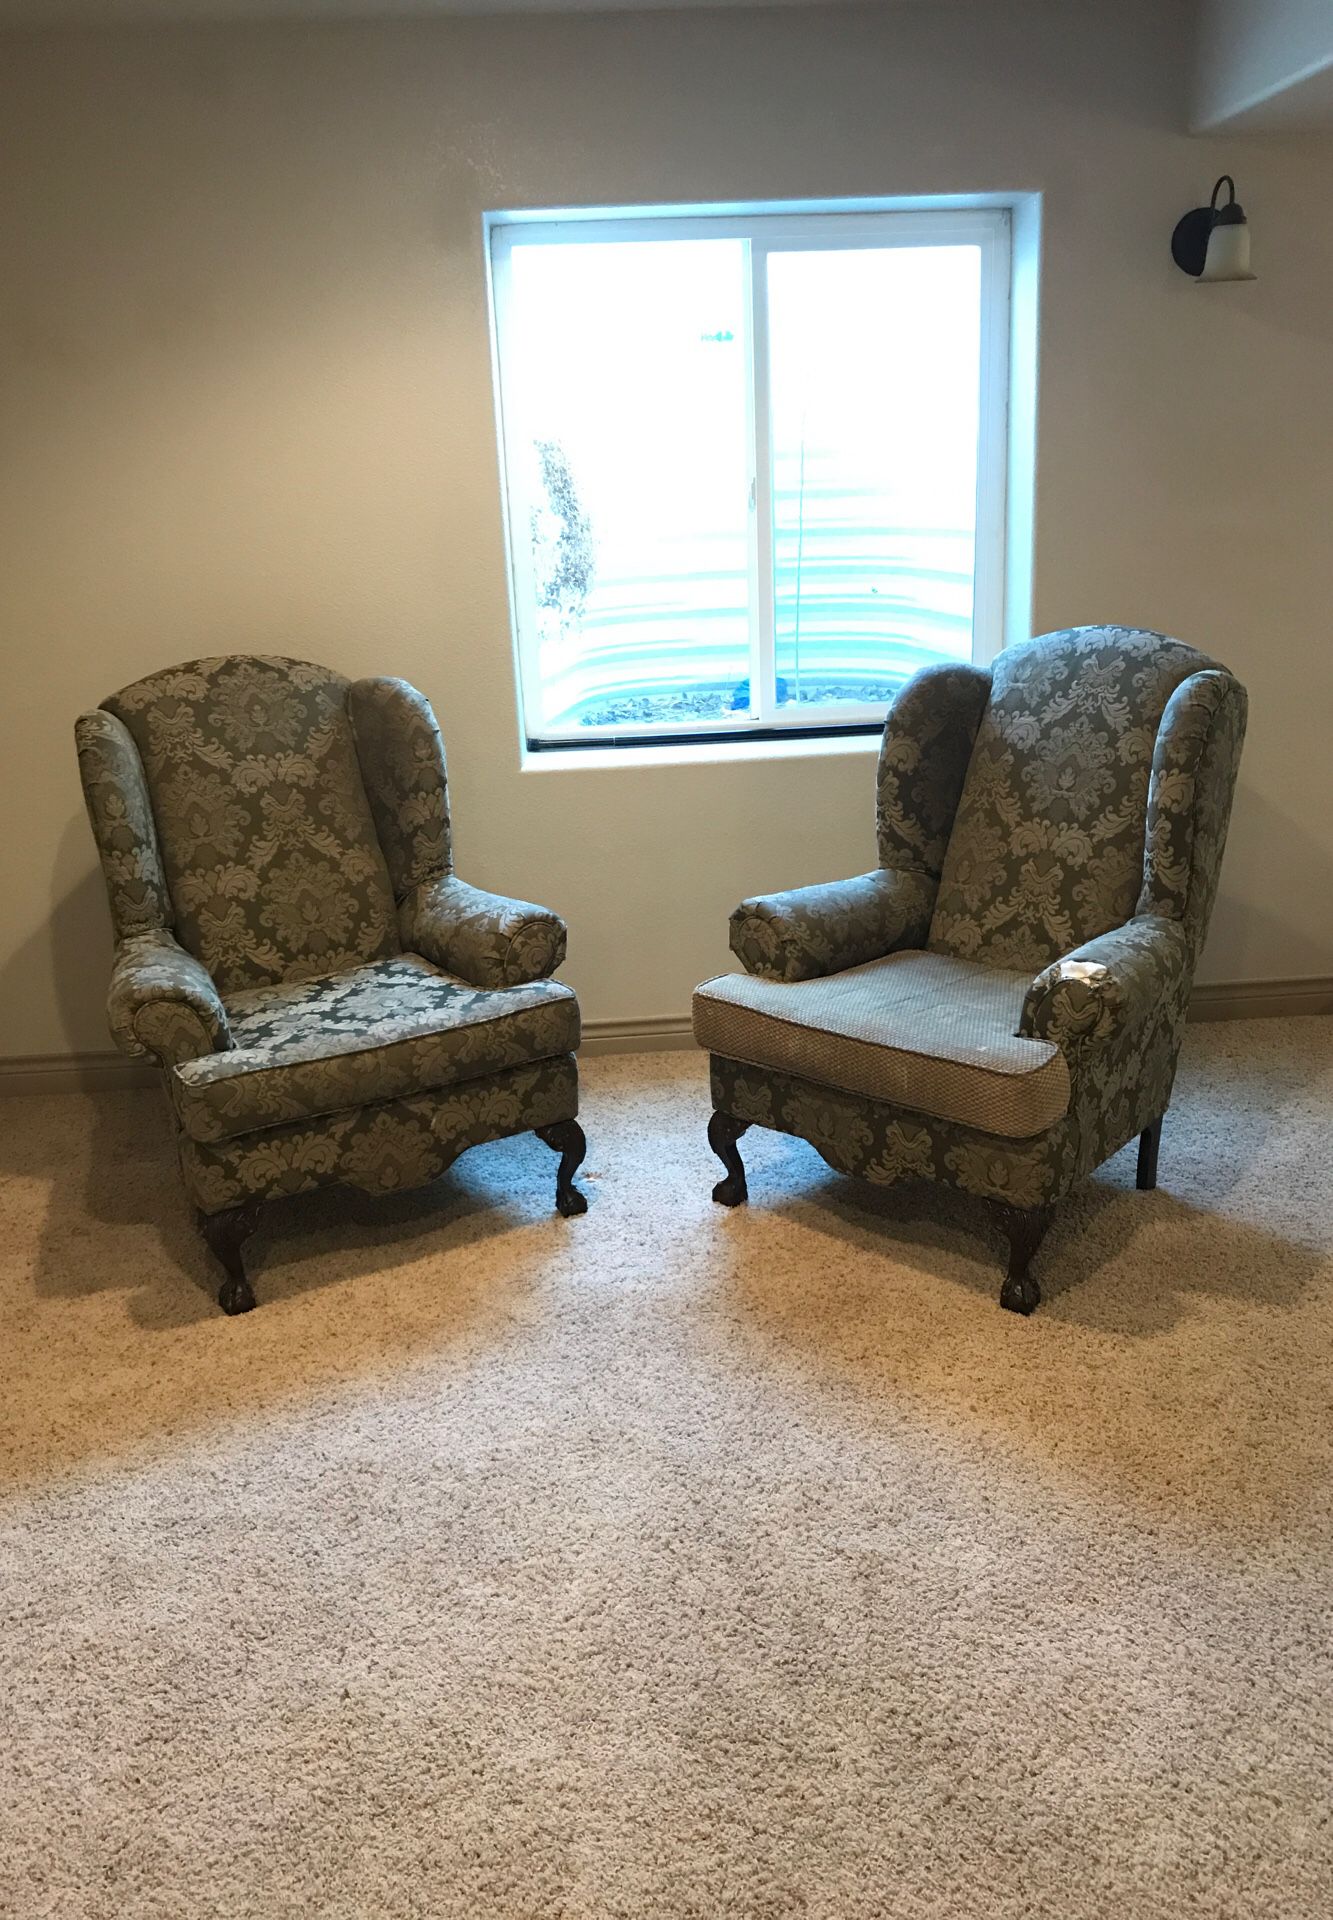 Set of high wingback chairs